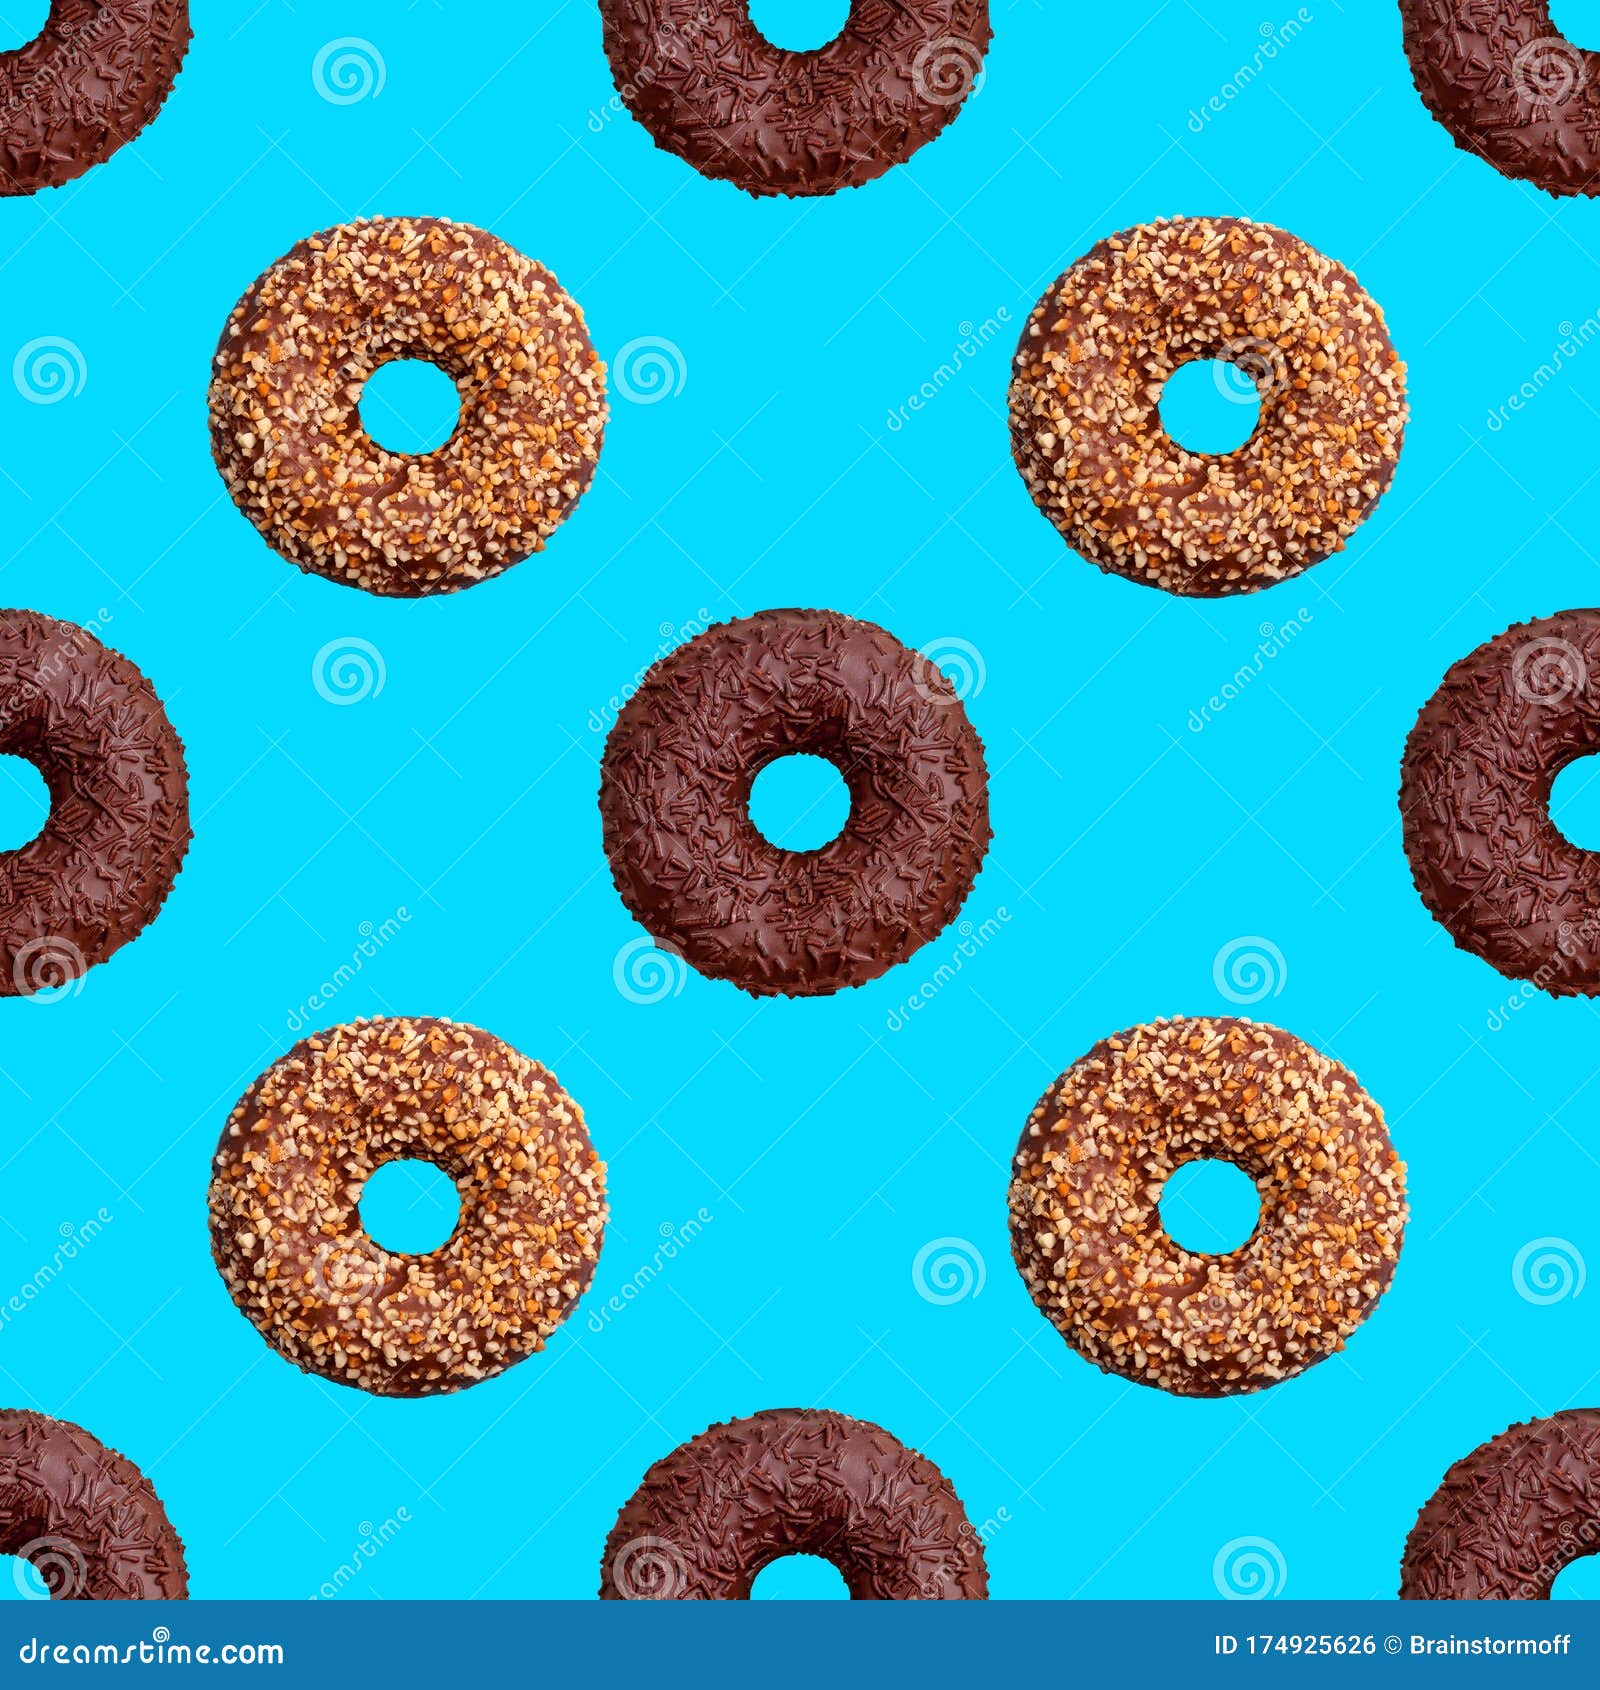 Seamless Pattern of Chocolate and Nut Donuts on Blue Background Isolated  Top View, Colorful Donut Repeating Ornament, Wallpaper Stock Photo - Image  of donuts, concept: 174925626